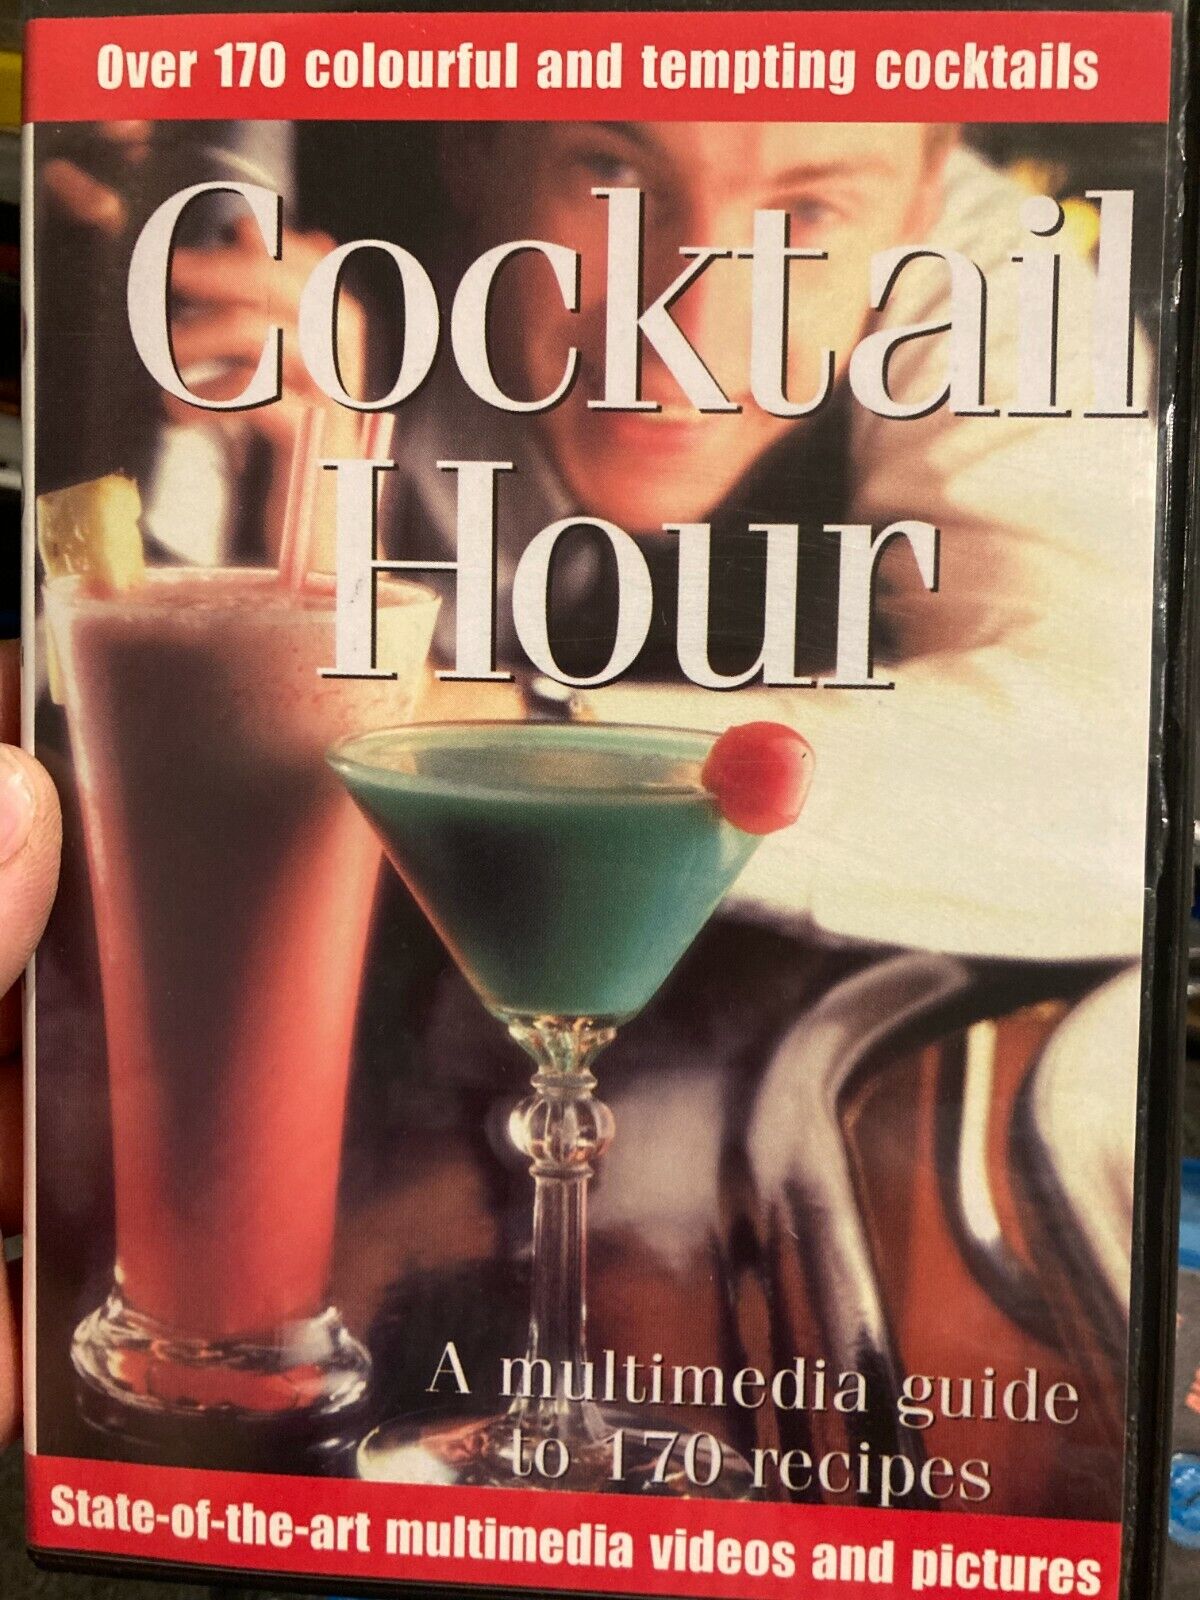 Cocktail Hour (1997) - A Multimedia Guide To 170 Recipes PC CD-ROM